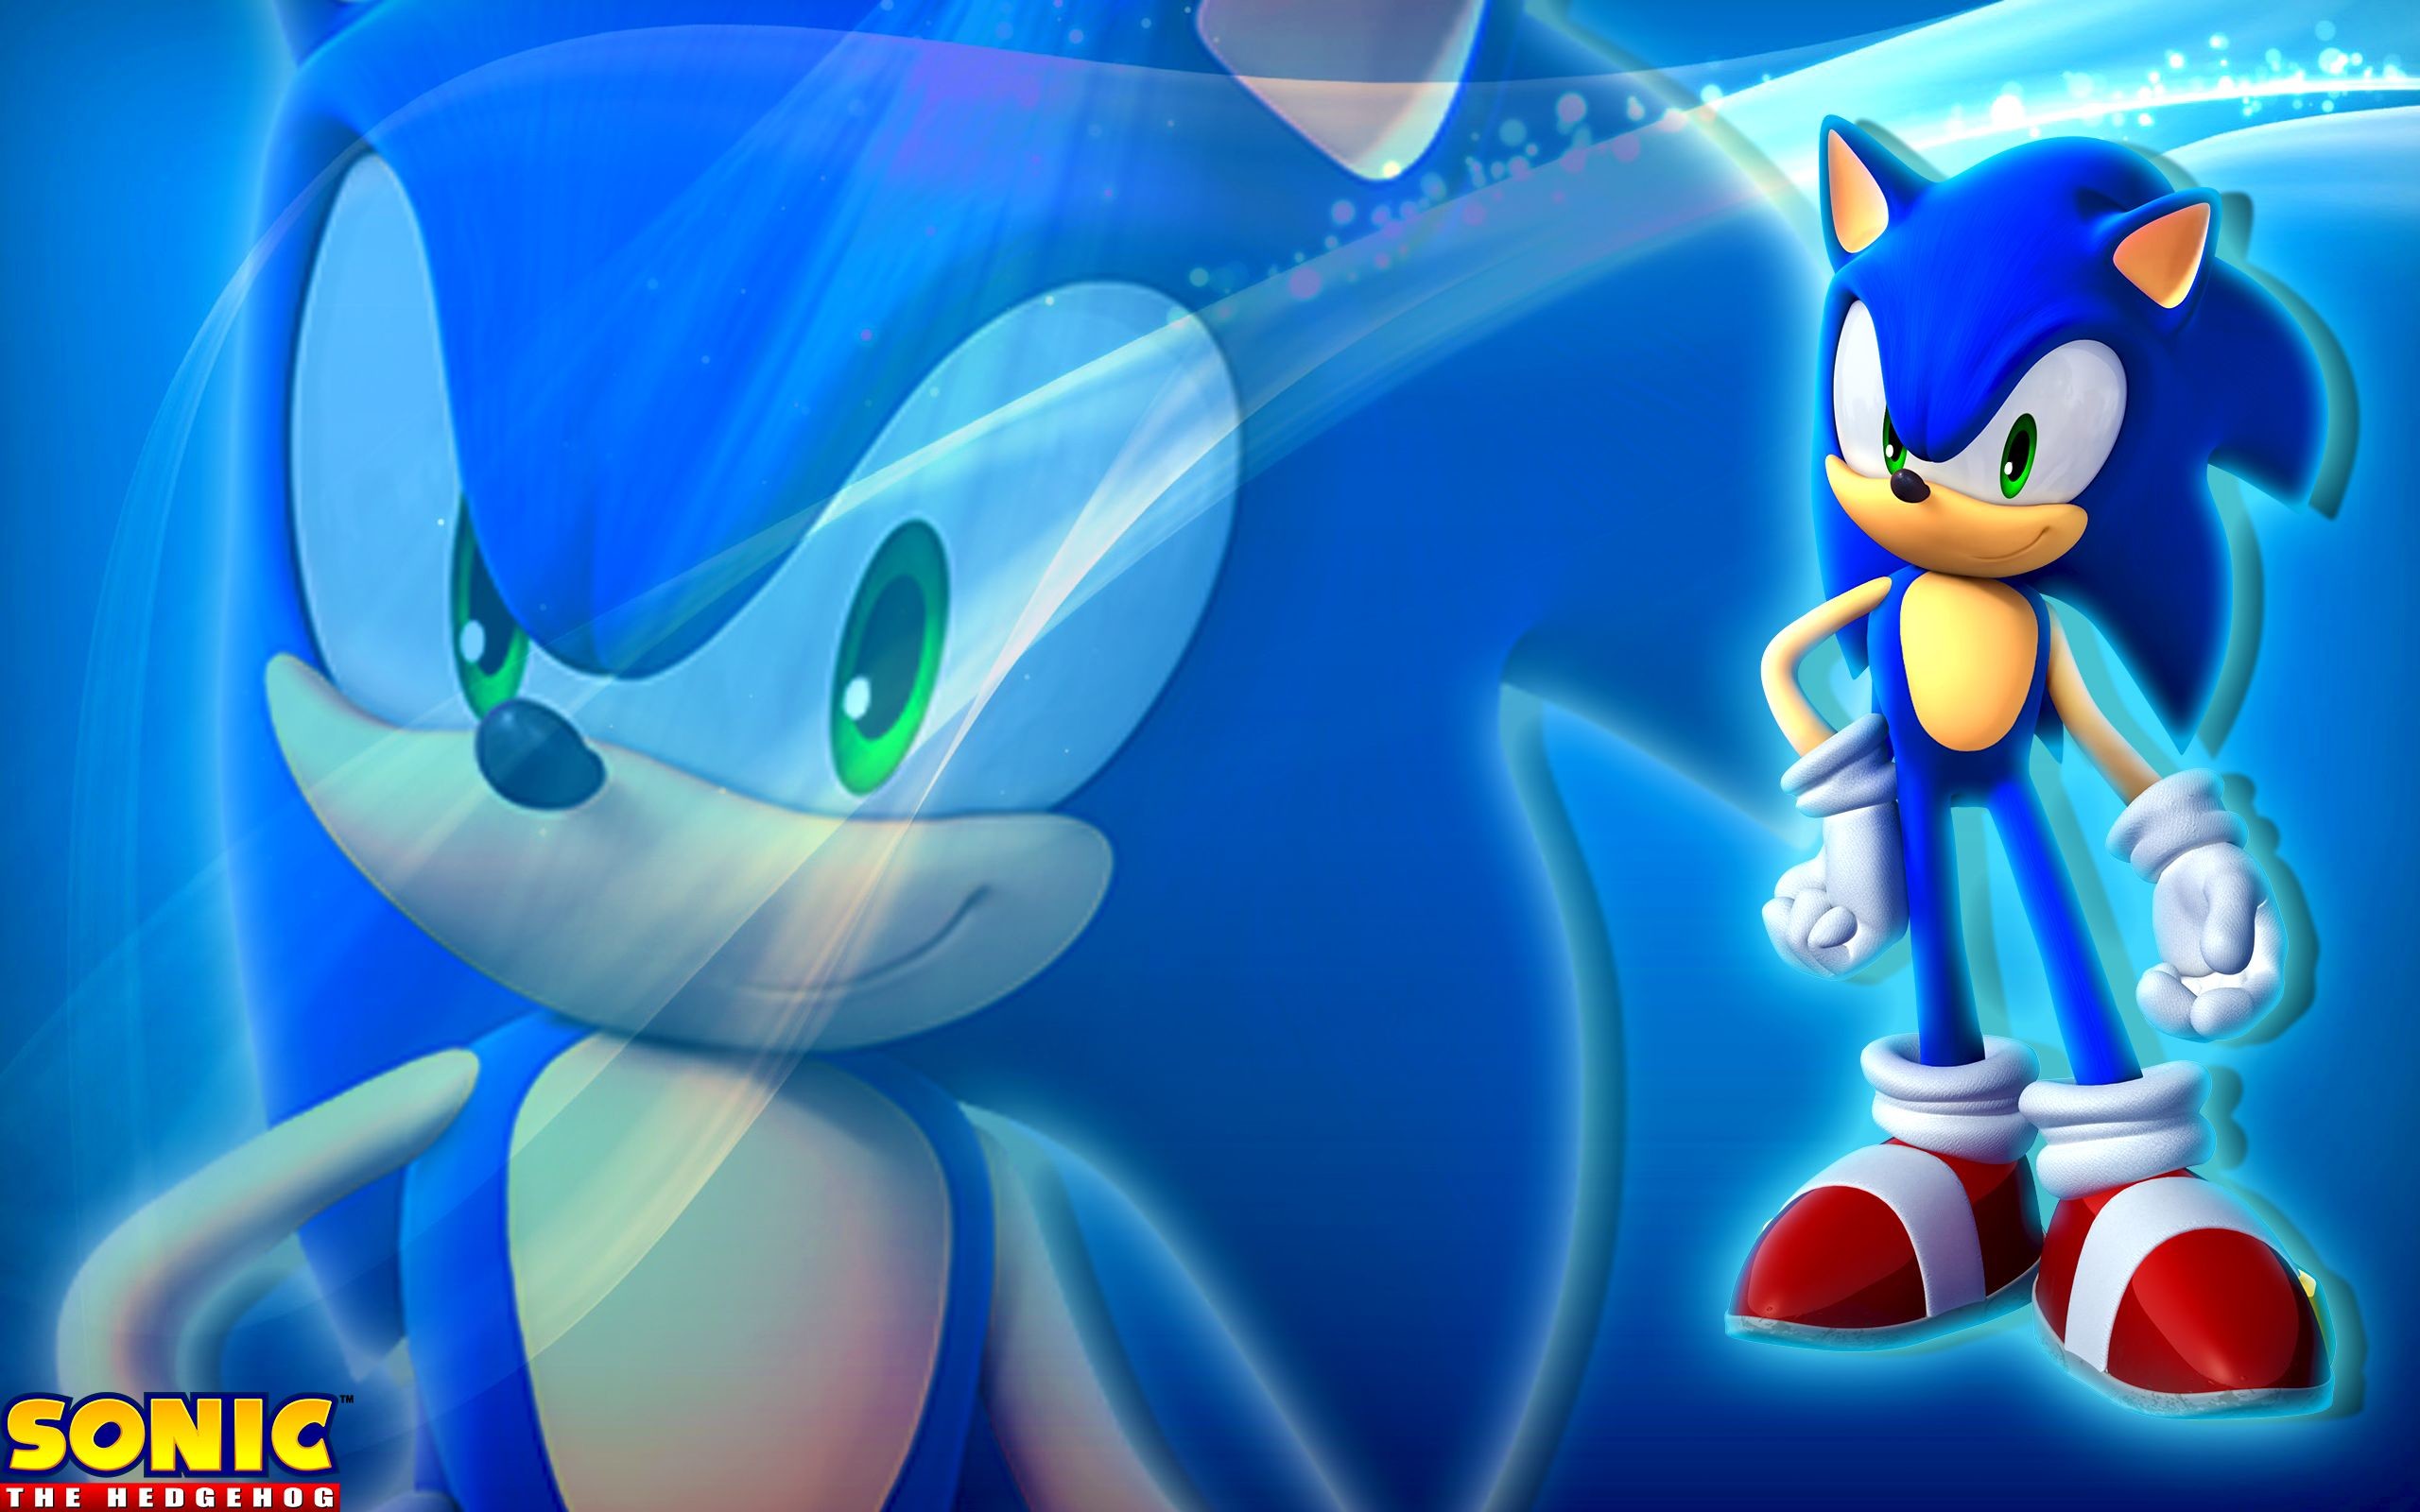 2560x1600 Sonic, Super Sonic and Hyper Sonic Wallpaper. by 9029561 on DeviantArt